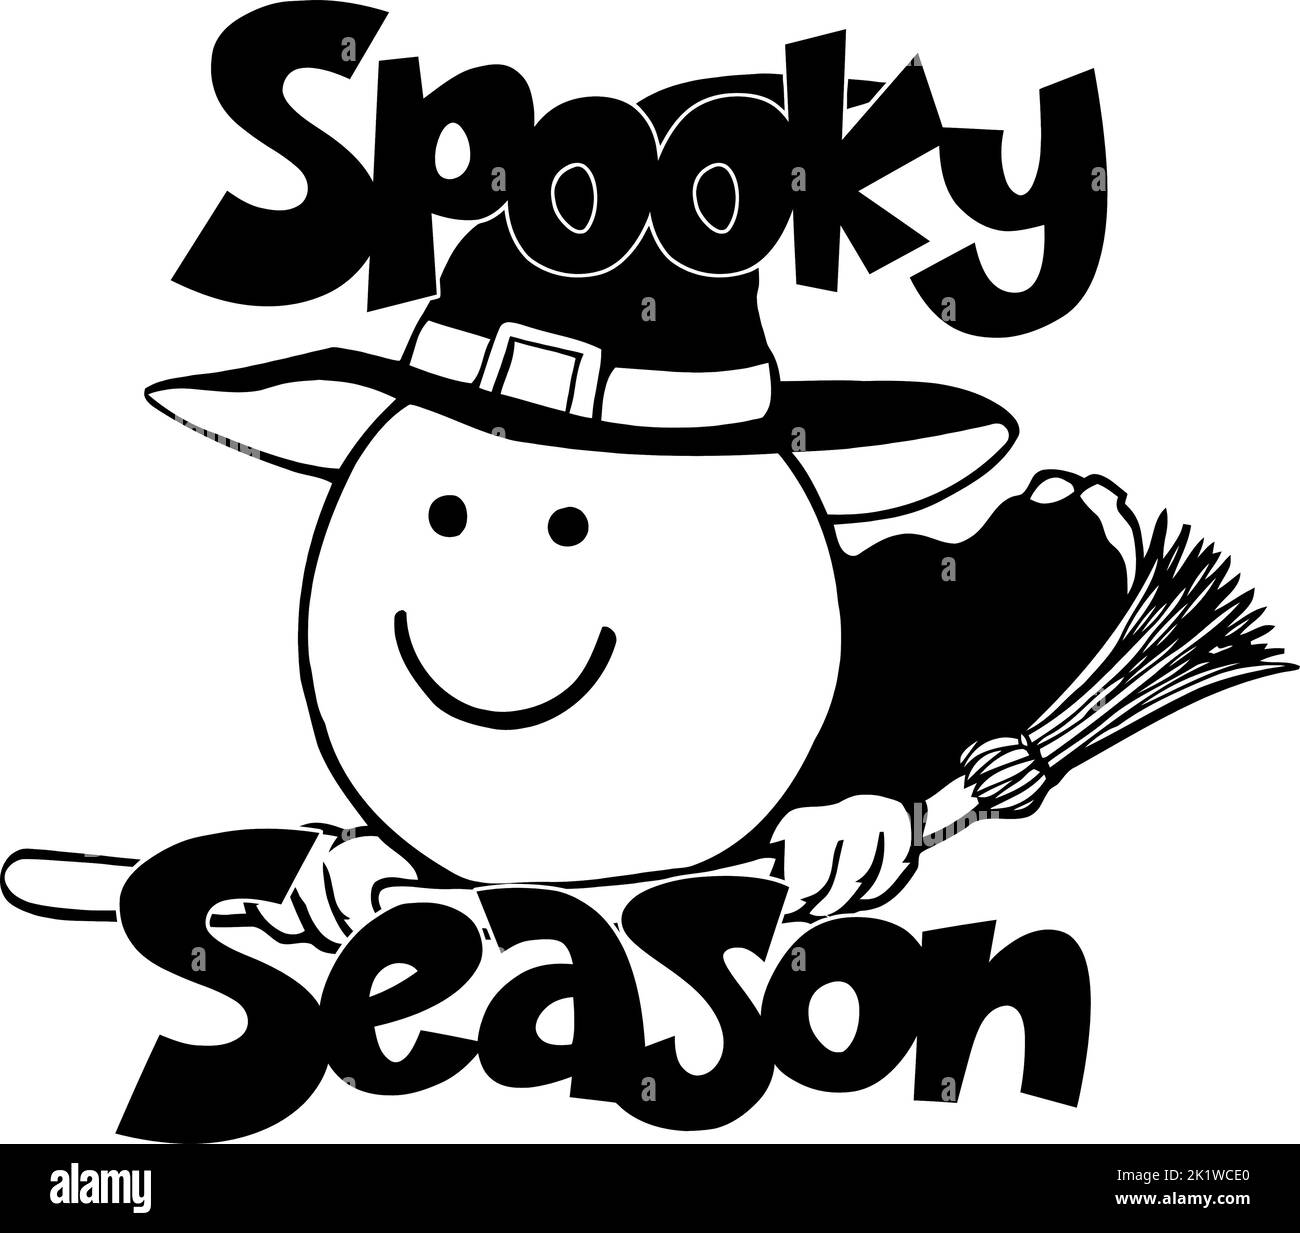 spooky season with smiley face witch Stock Vector